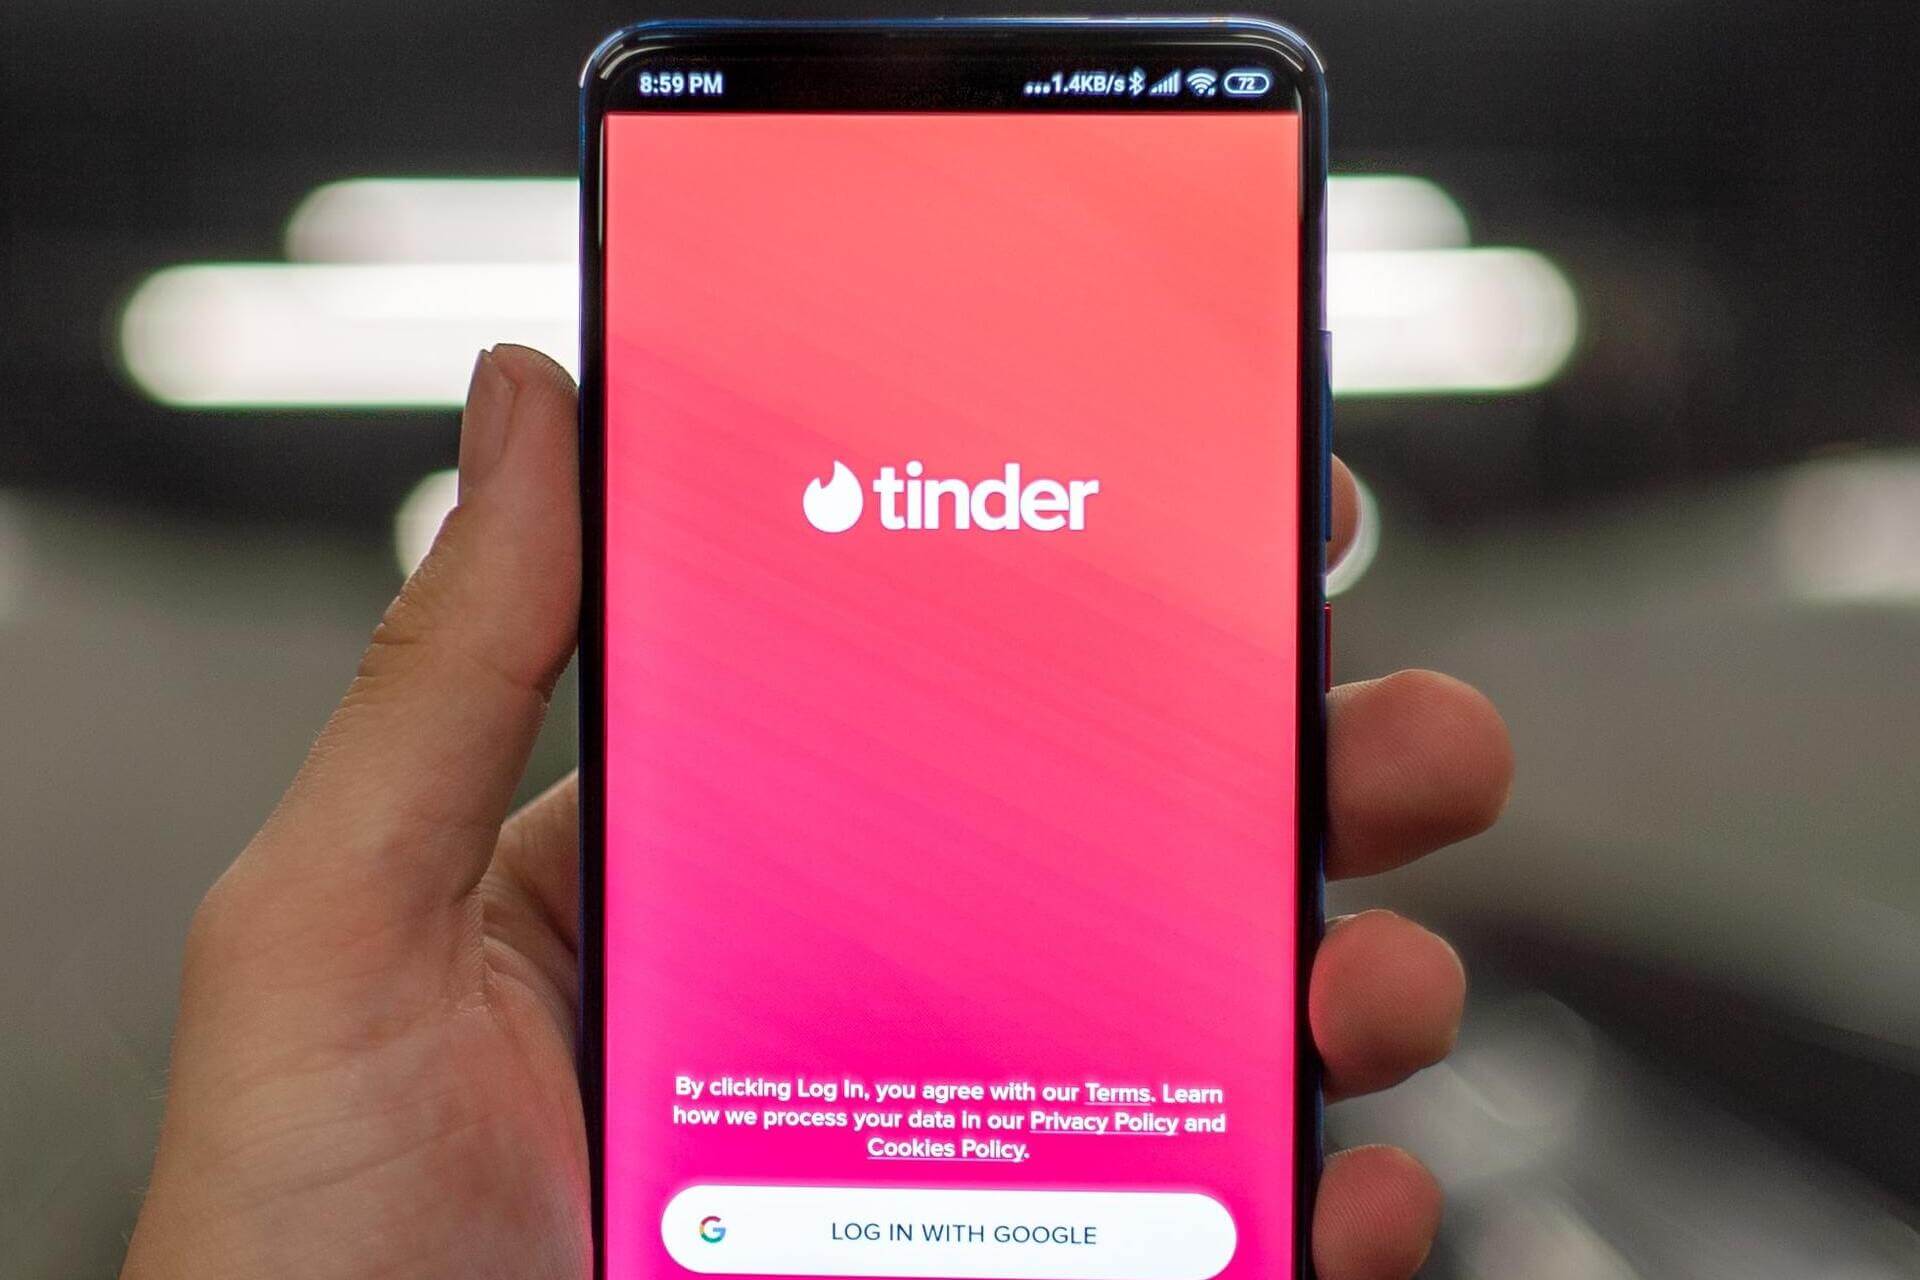 How to see tinder profiles offline